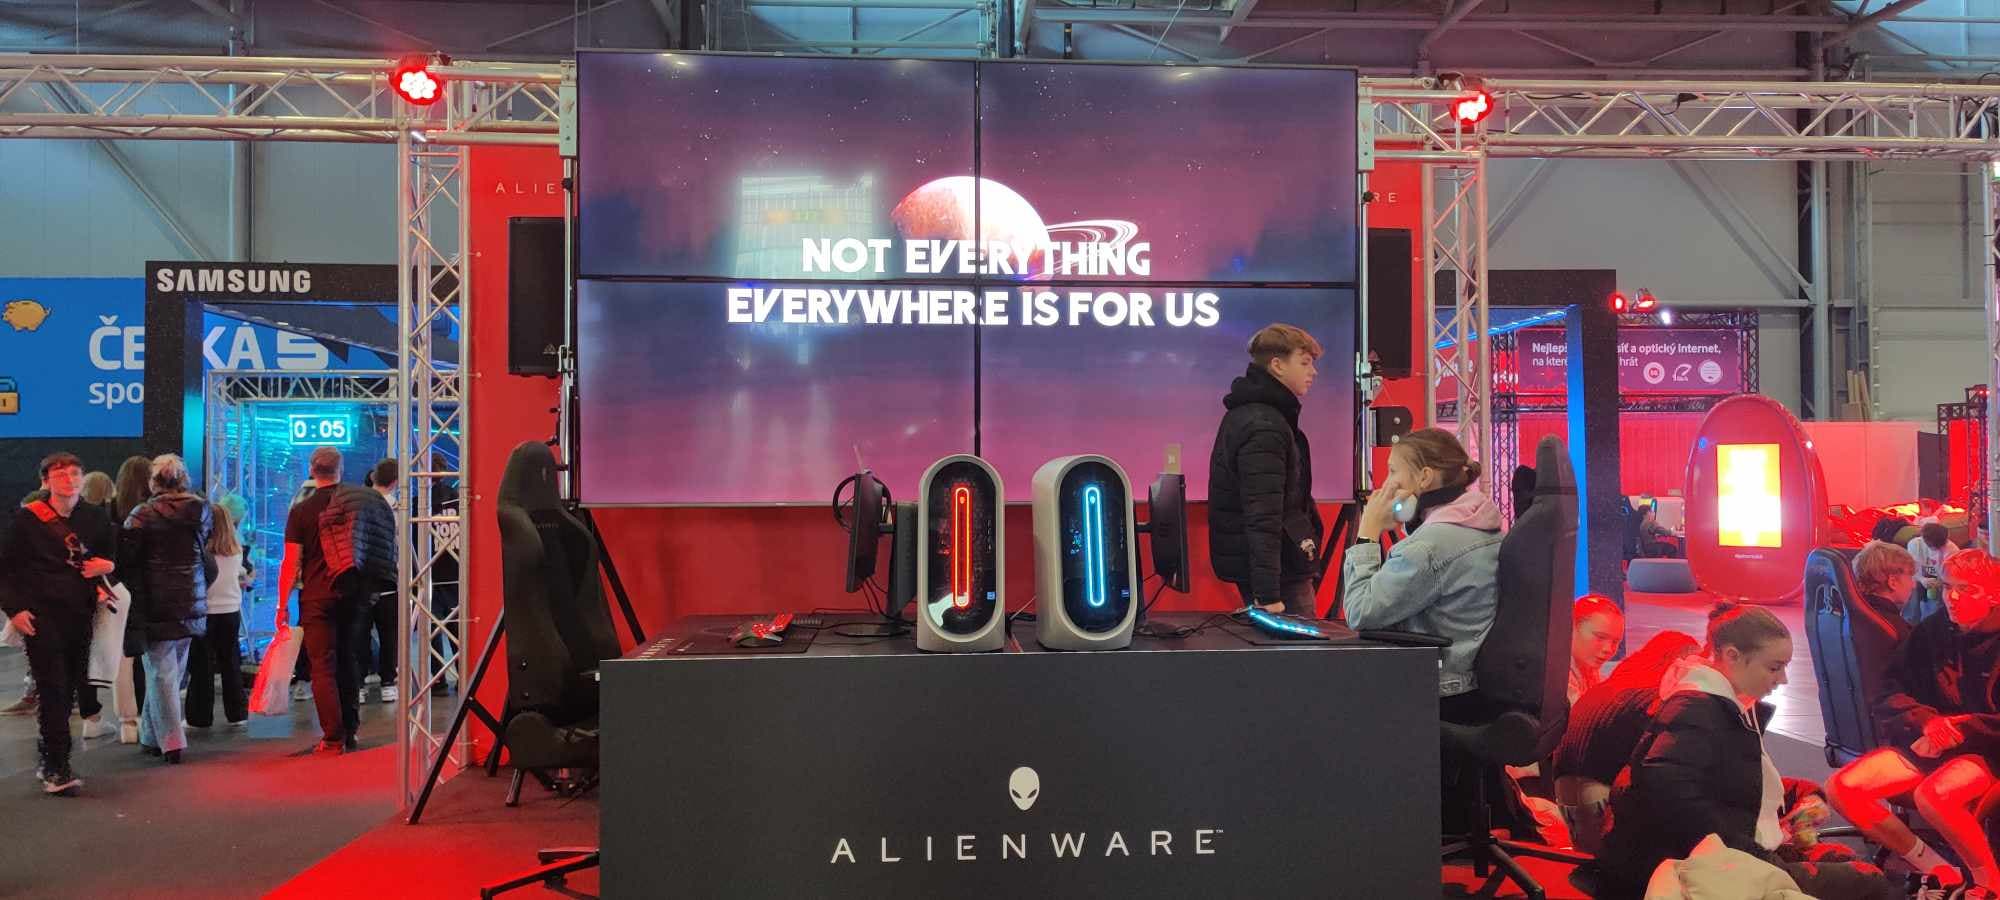 Czech esport league had a spectacular finals last weekend. It was all about Team Sampi and Alienware.